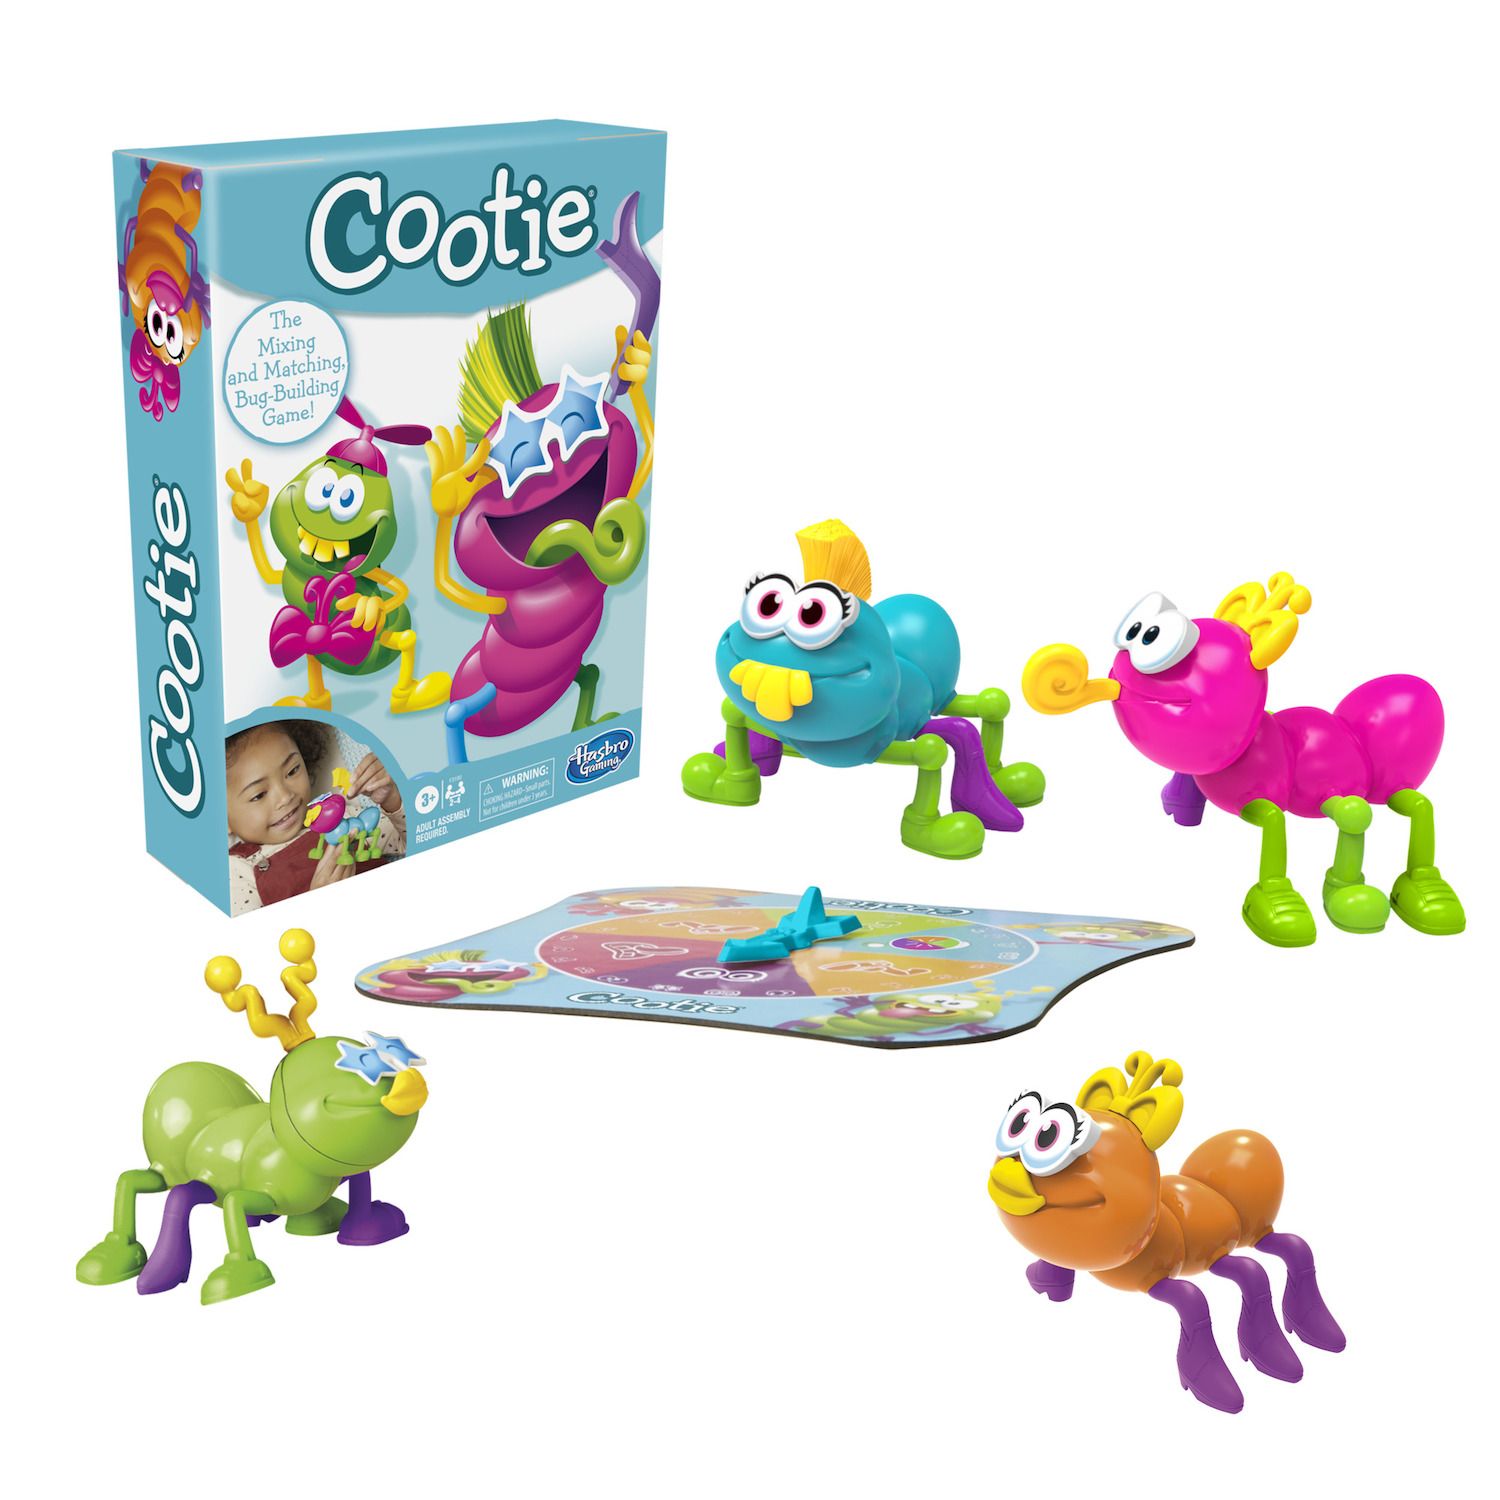 Image for Hasbro Cootie Board Game by at Kohl's.